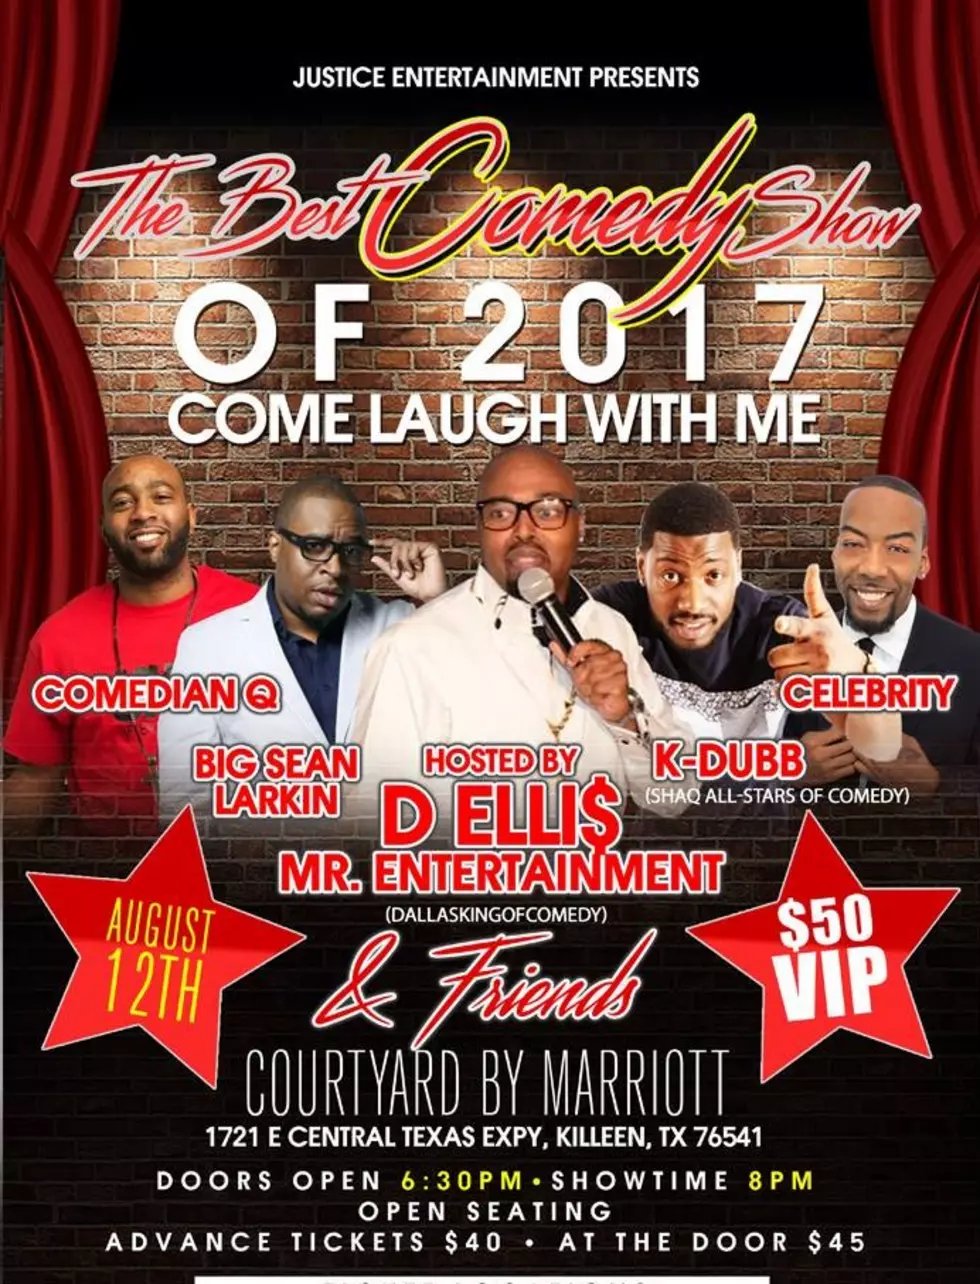 Justice Entertainment Presents &#8220;Come Laugh At Me&#8221; August 12th at the Courtyard by Marriott!